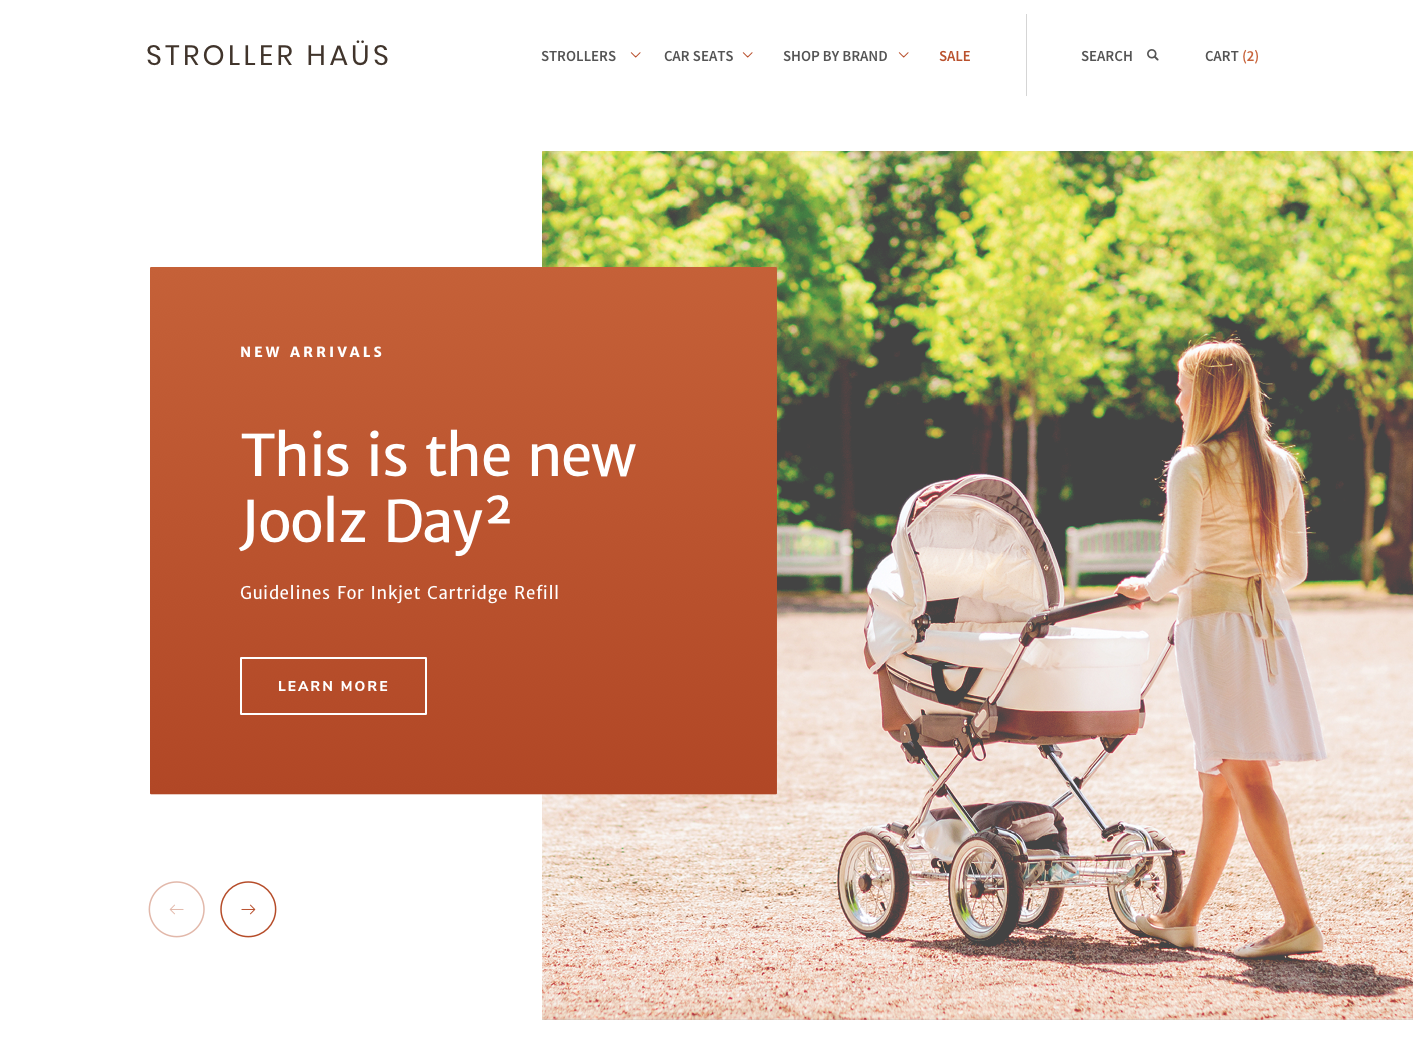 Stroller product web page design with warm colors